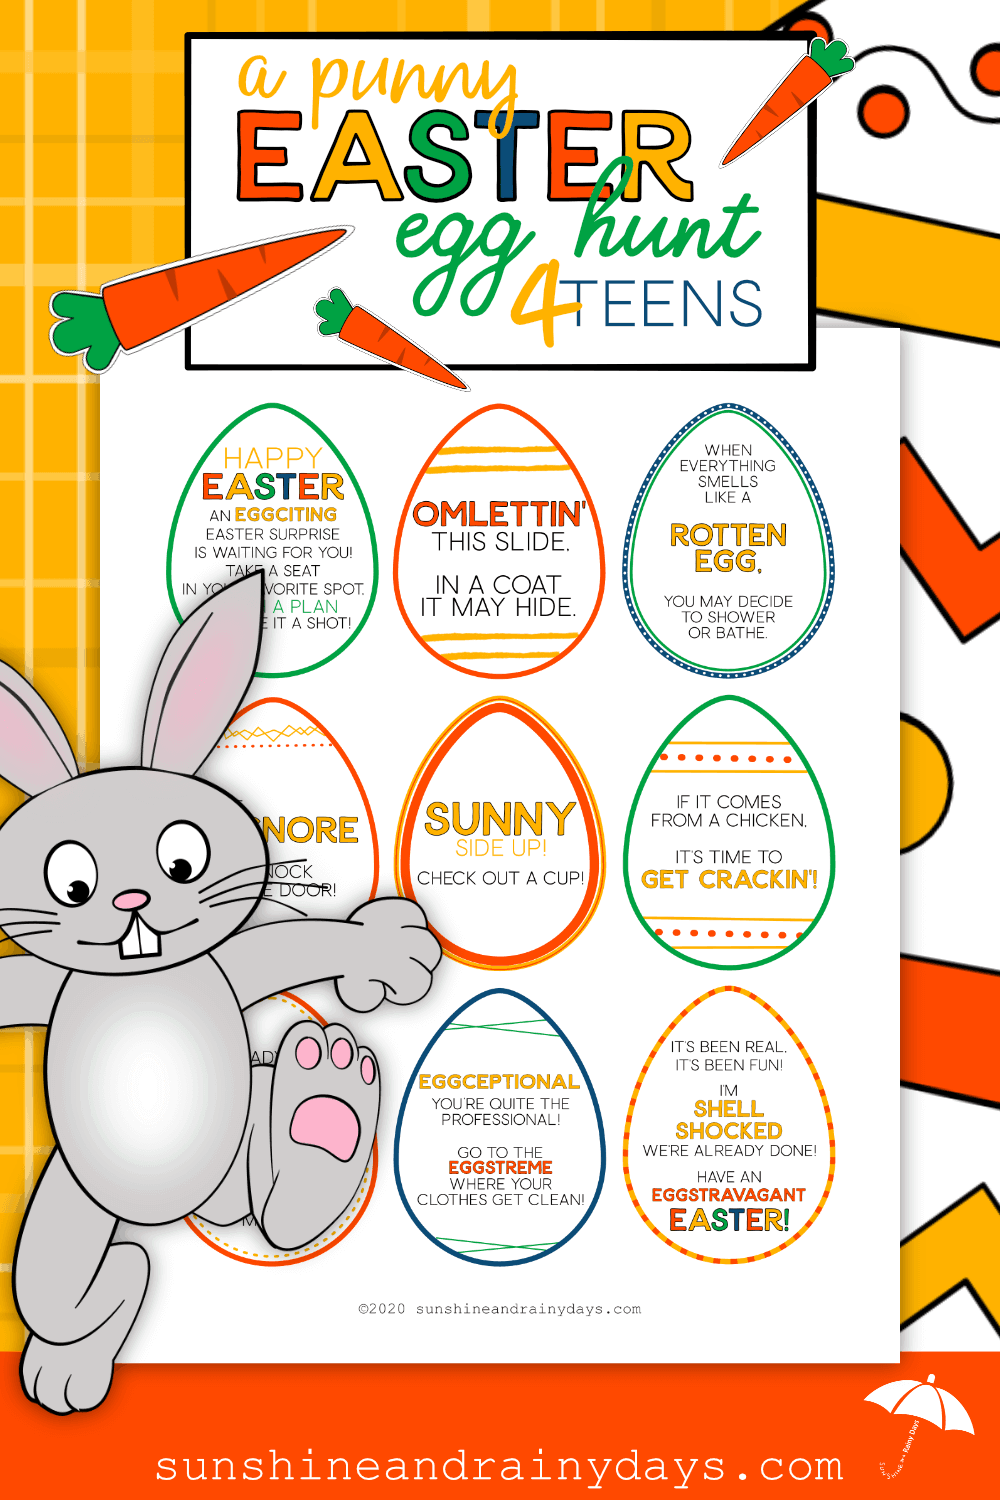 A Punny Easter Egg Hunt for Teens! - Sunshine and Rainy Days